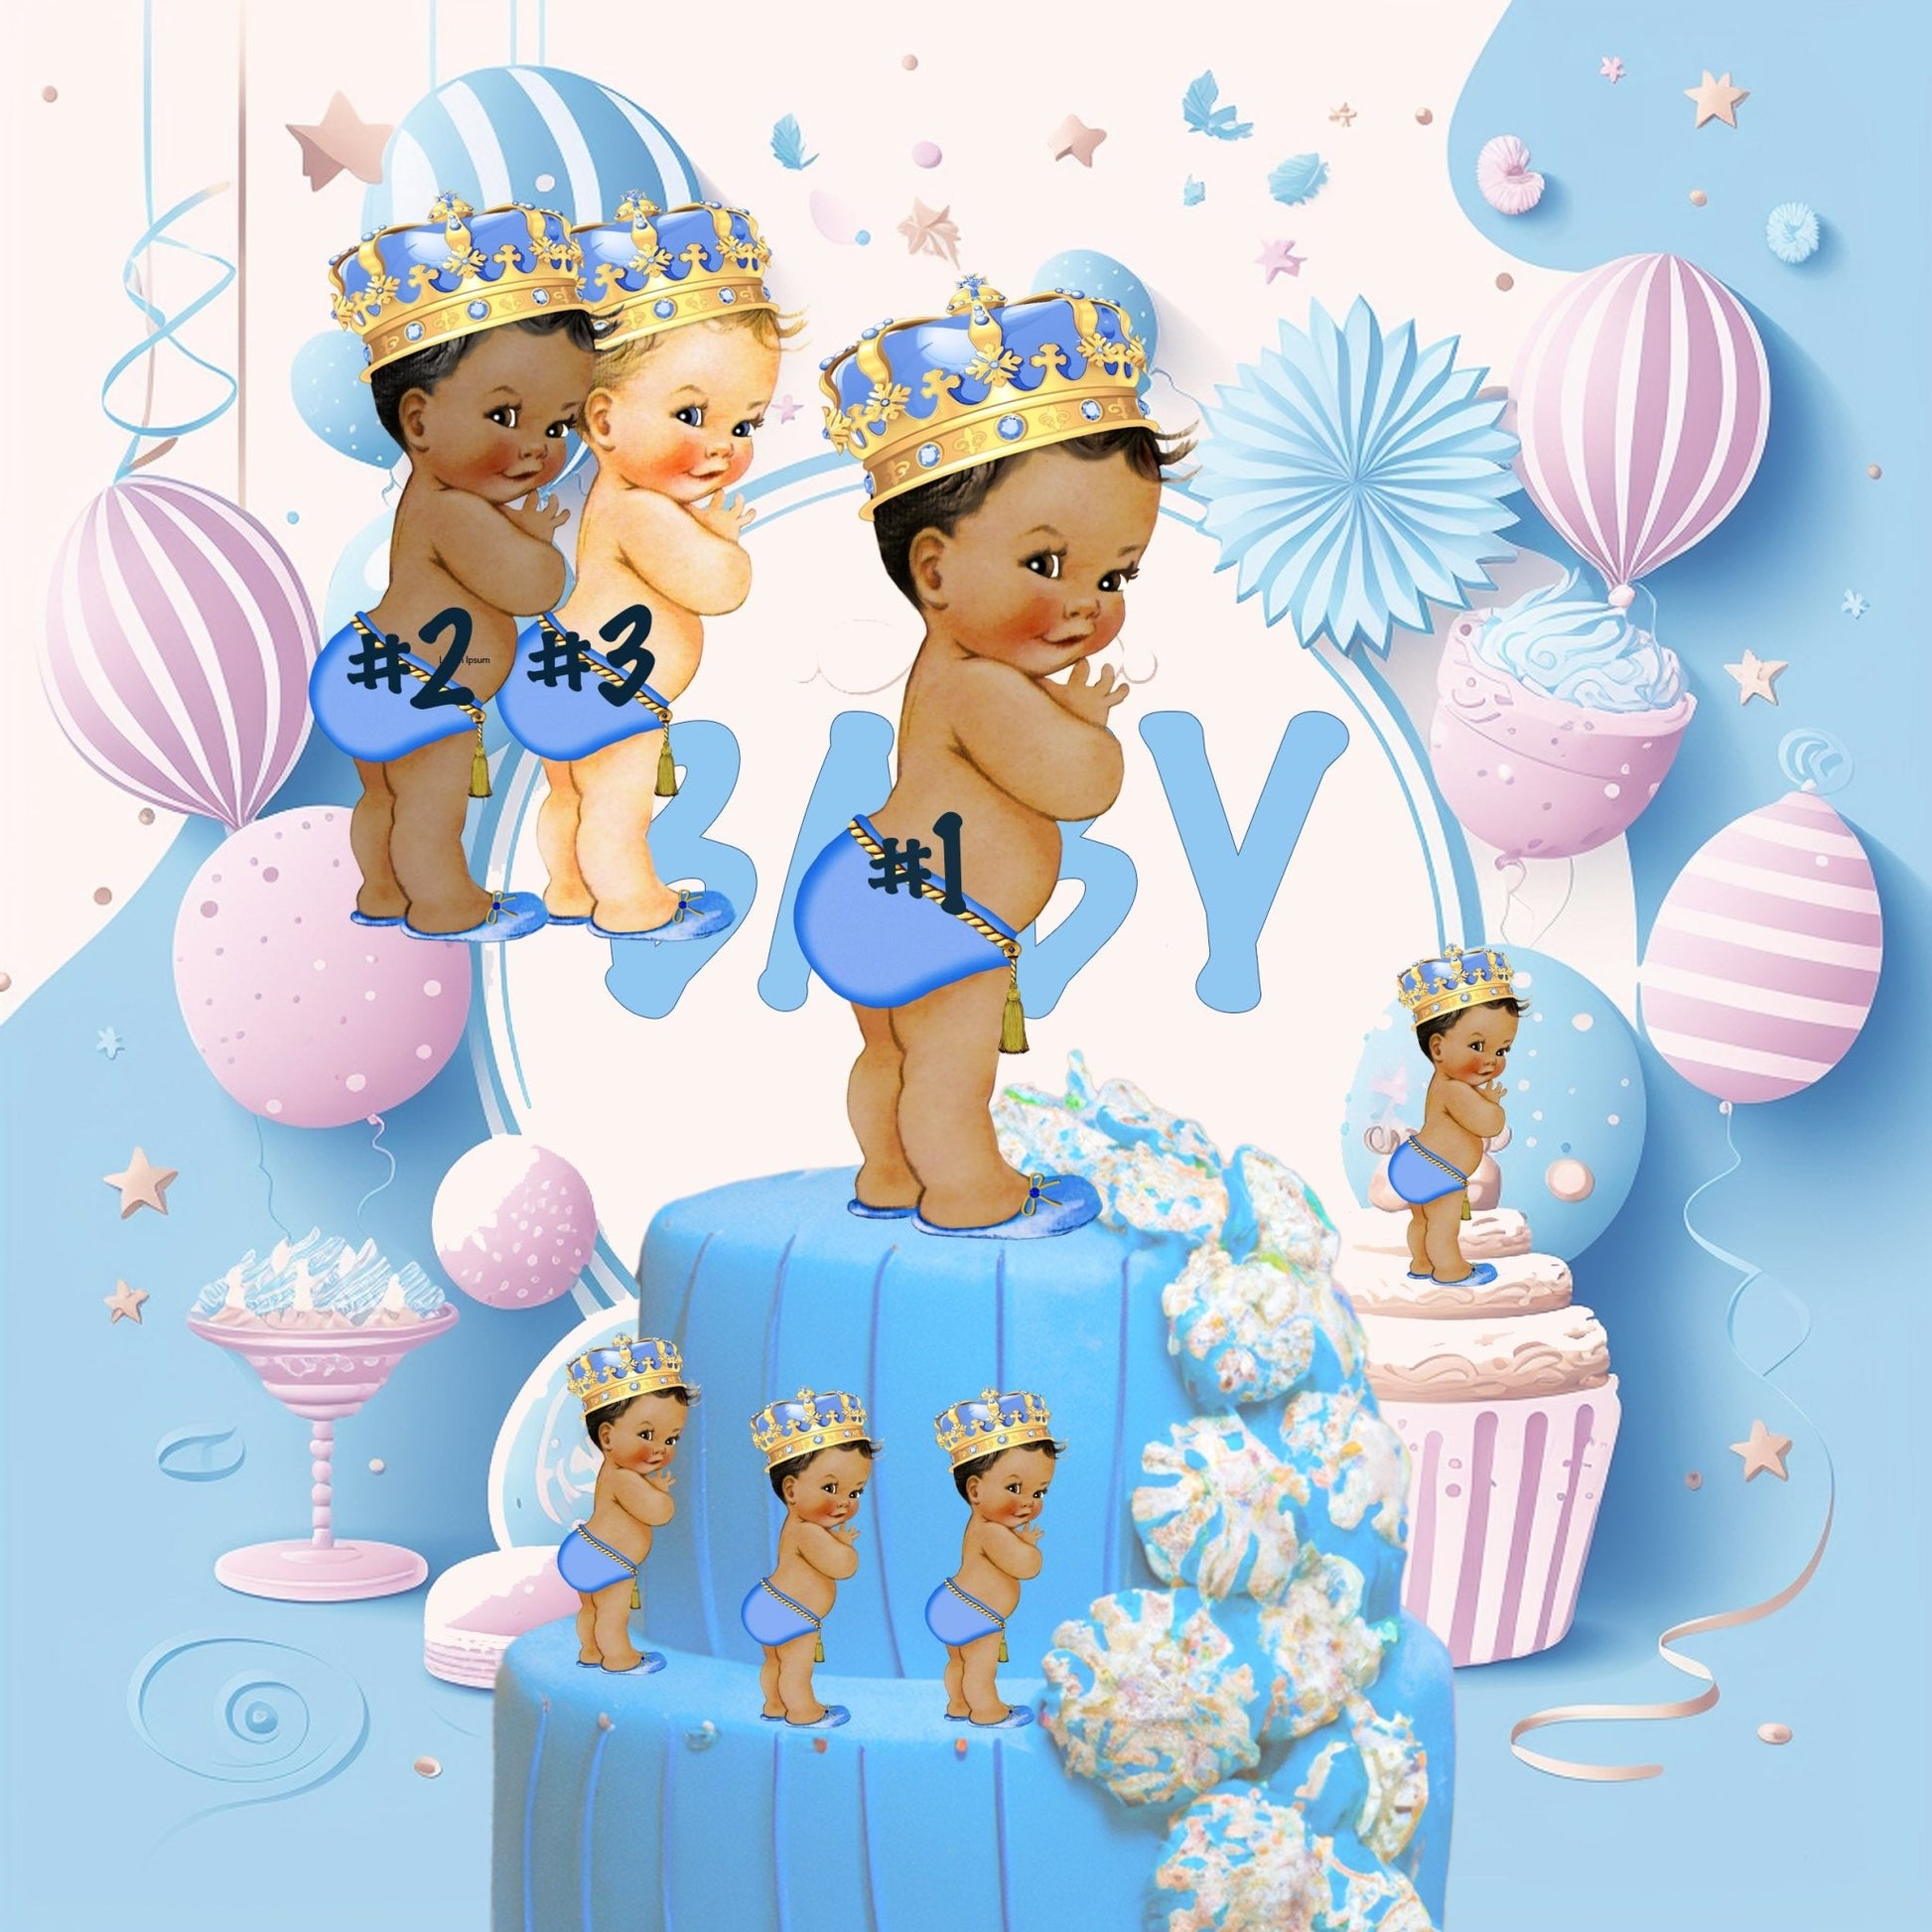 Royal Baby Shower Prince Centerpieces Light Blue Gold Rold Birthday Party Decorations, -prince-prince baby shower